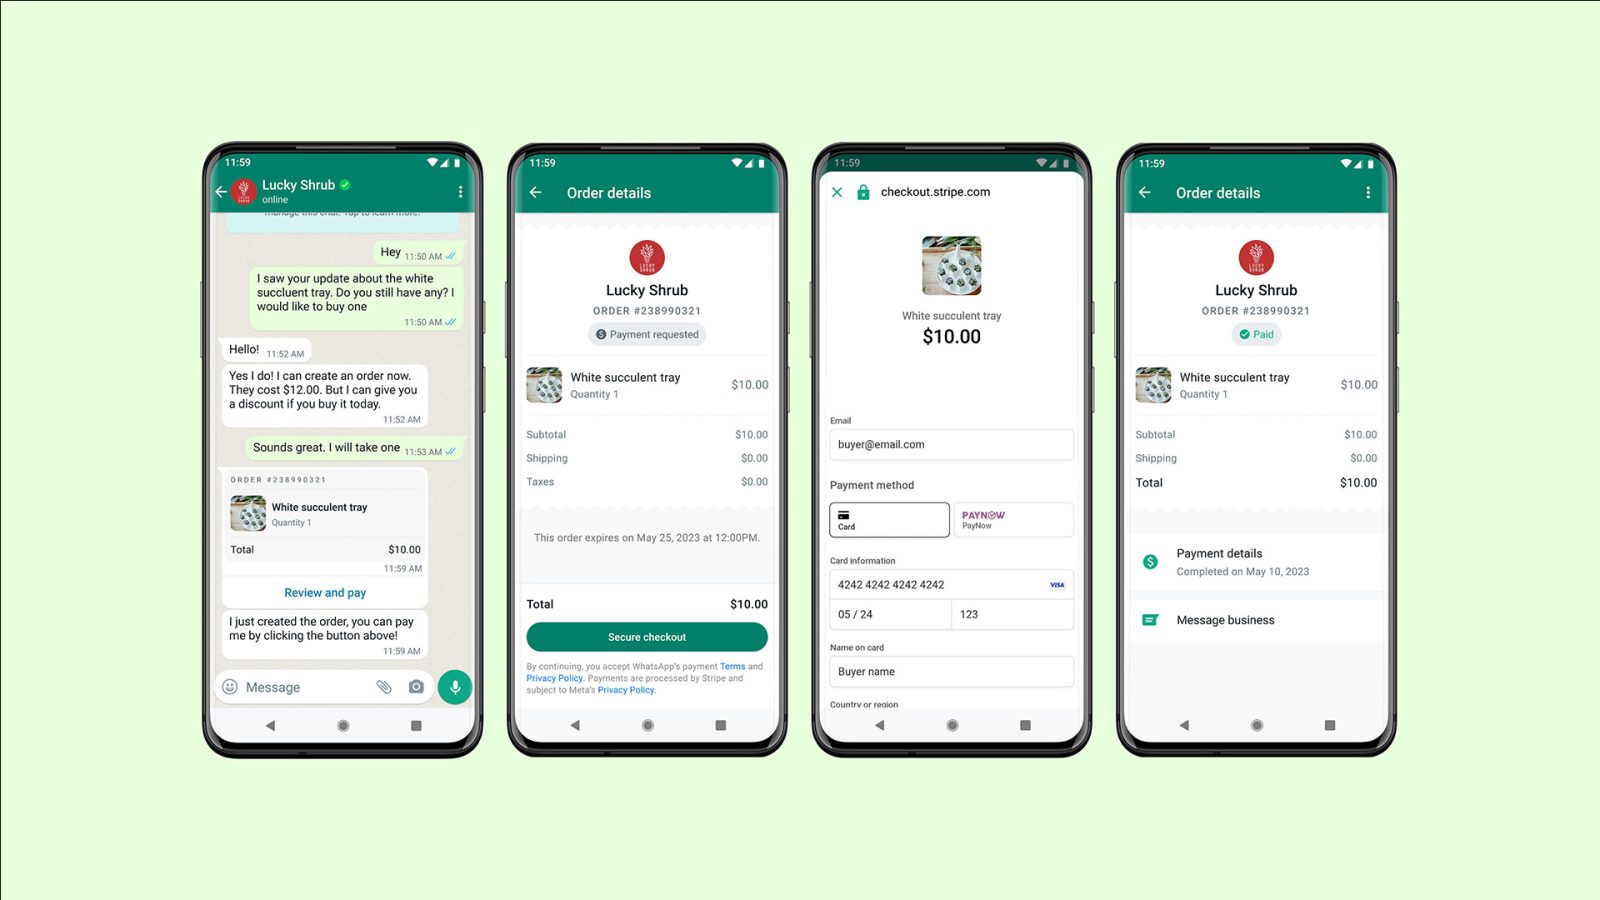 WhatsApp users in Singapore can now pay merchants directly from the app